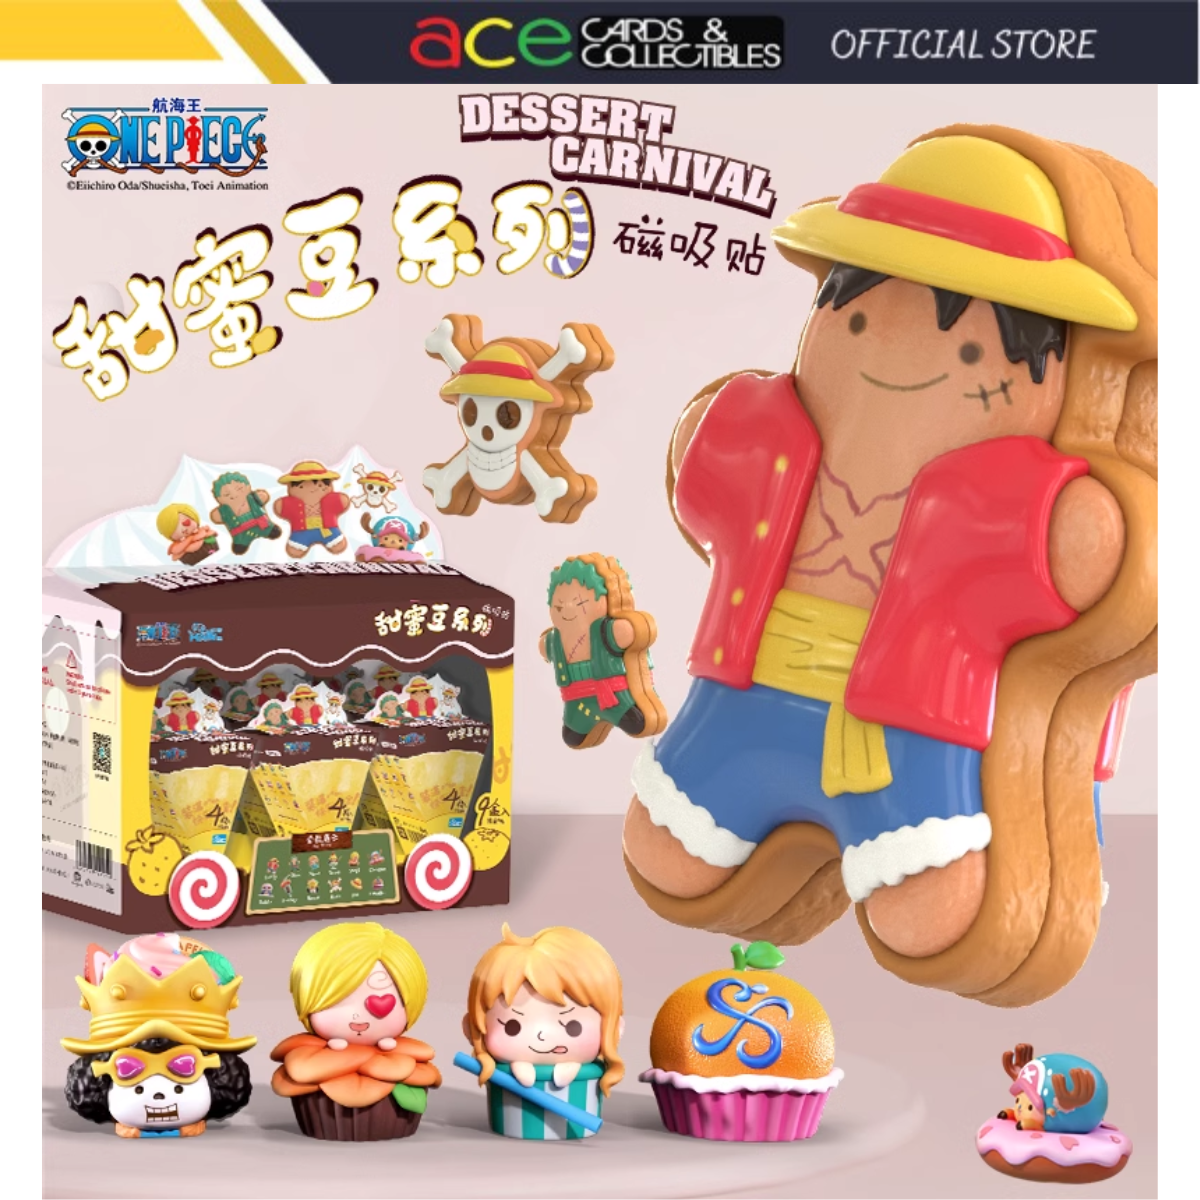 Toei Animation x One Piece Dessert Carnival Magnetic Patch Series-Single Box (Random)-Toei Animation-Ace Cards & Collectibles